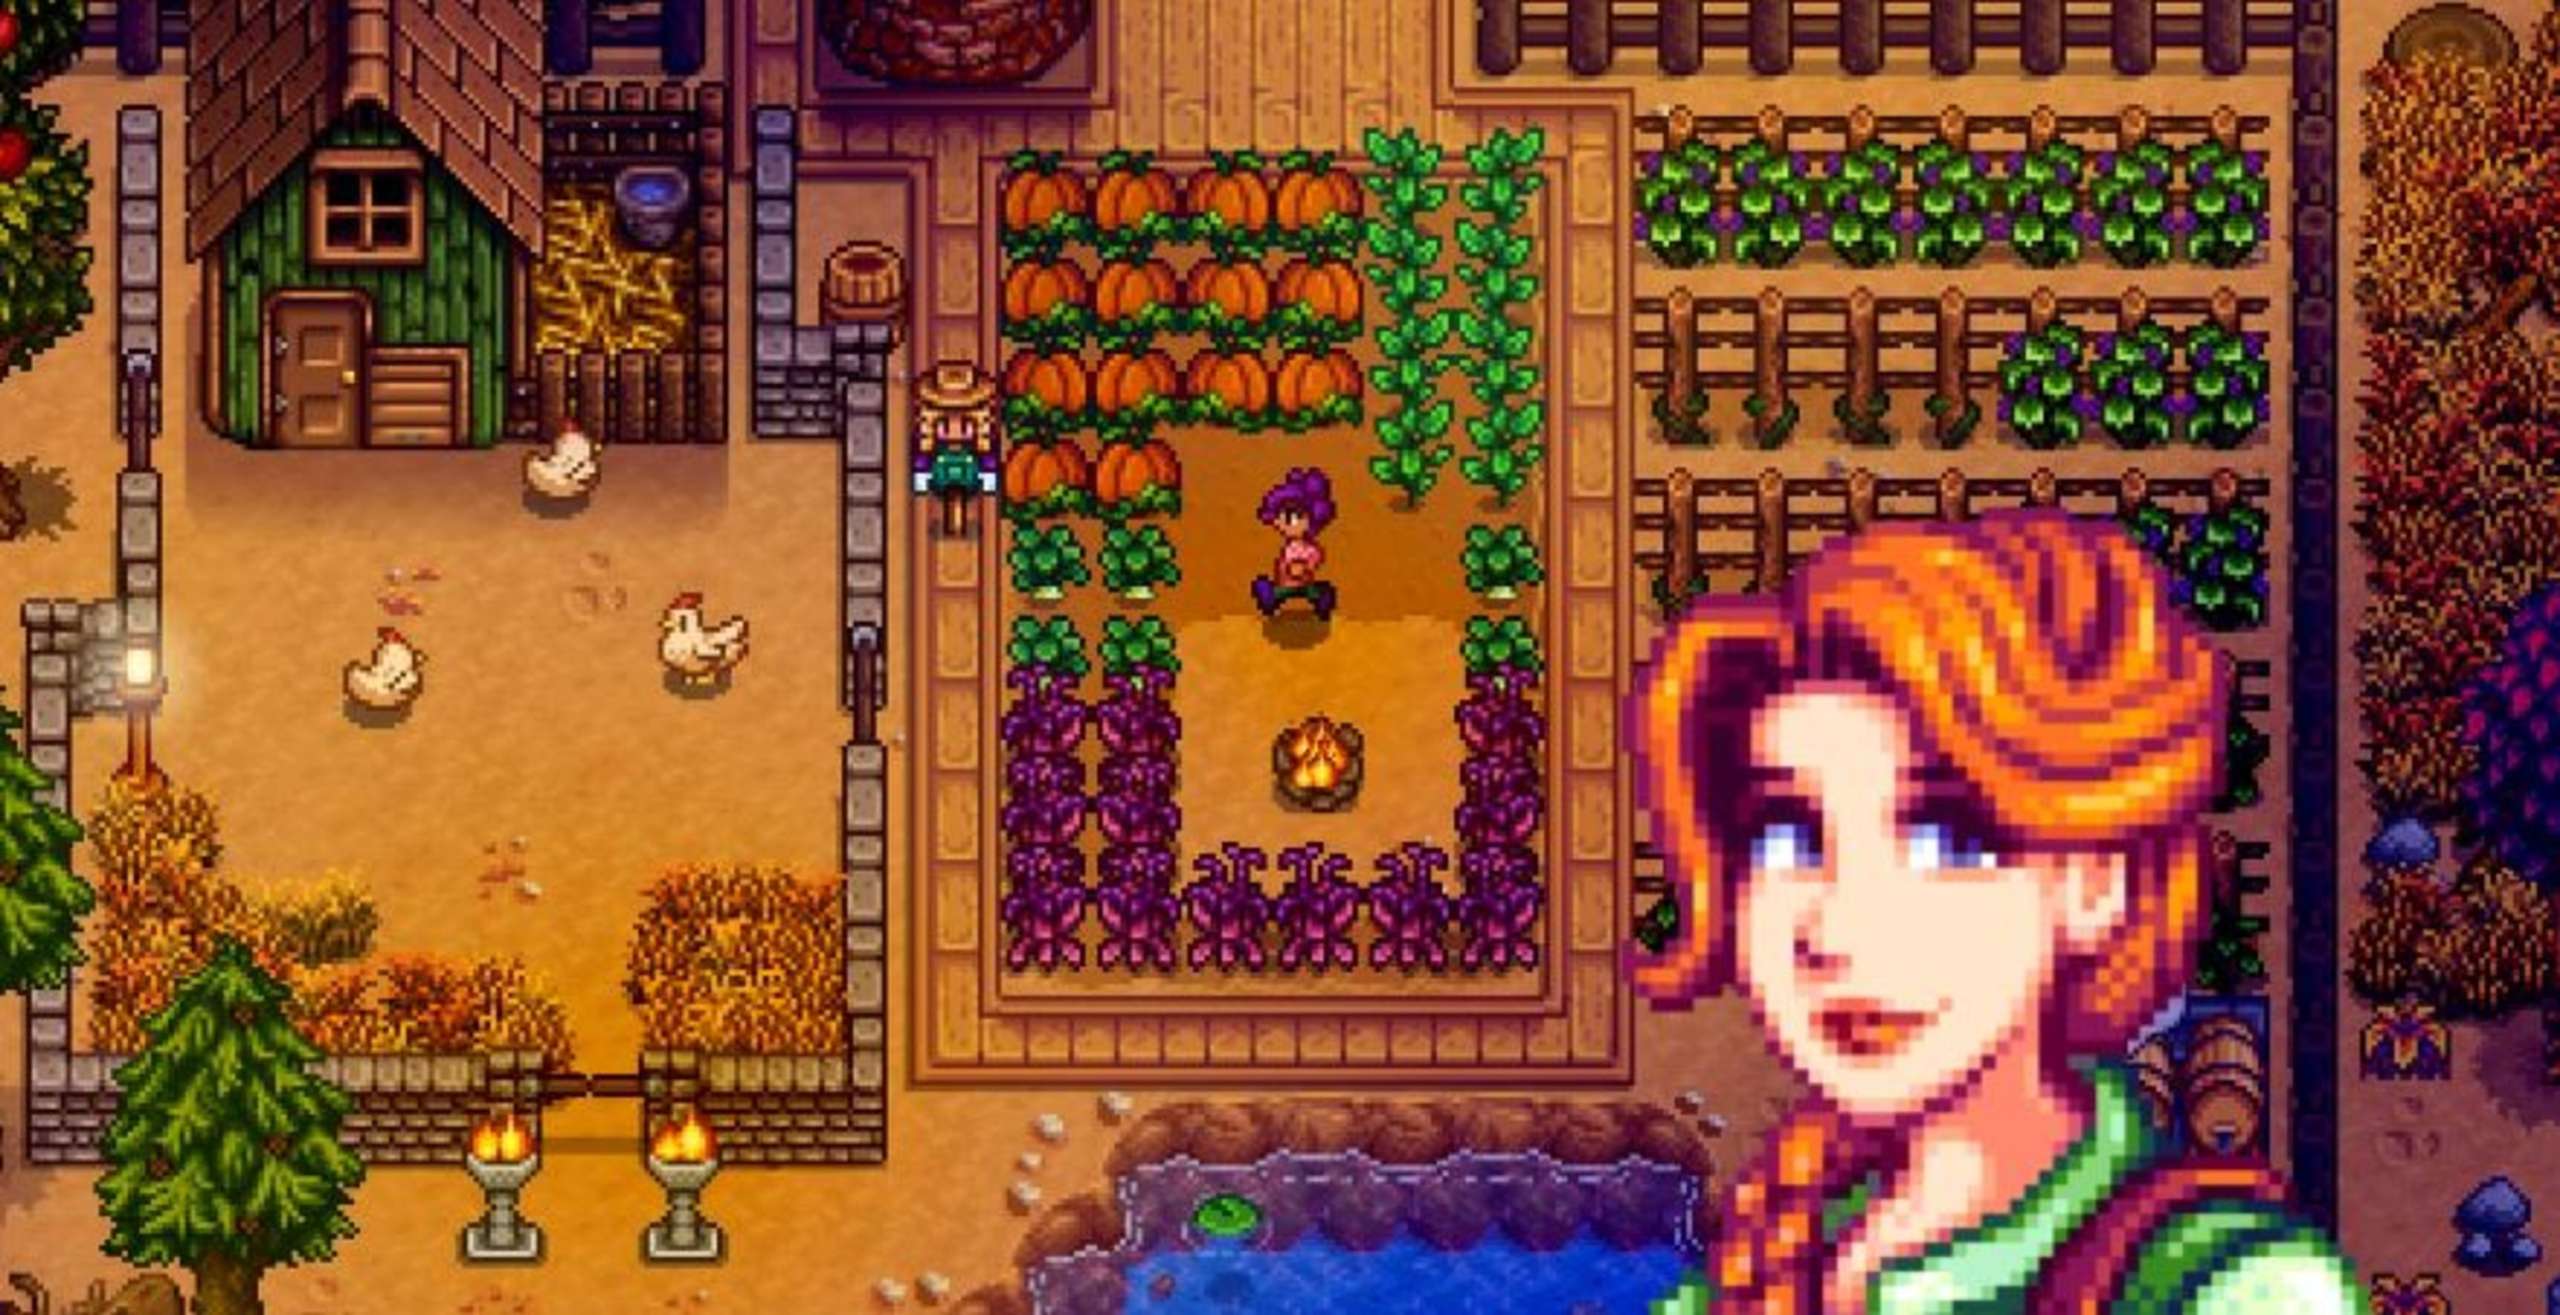 Stardew Valley Fans Have Taken Their Passion For The Game To New Heights, With One Fan Displaying A Gorgeous Diorama Of Leah’s Home